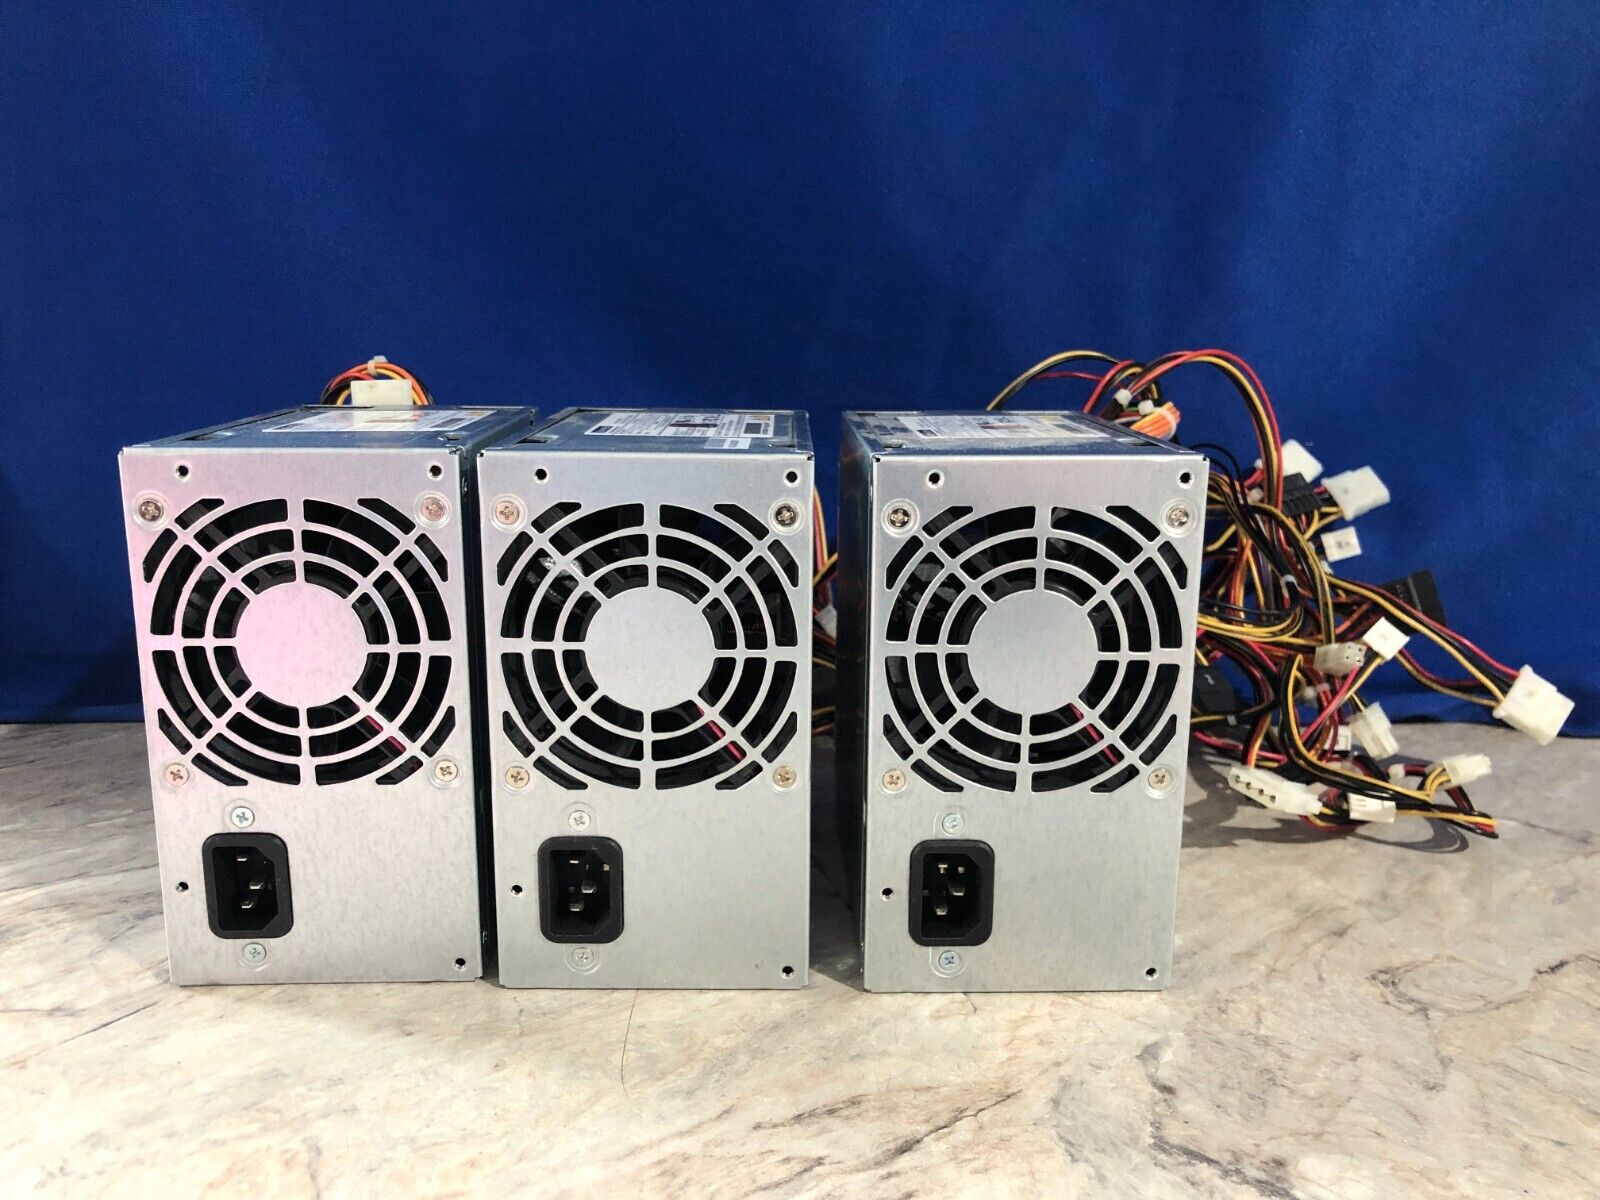 Lot of 3x Advantech DPS-300AB-70 A Power Supply for PC Computer Tower - Working